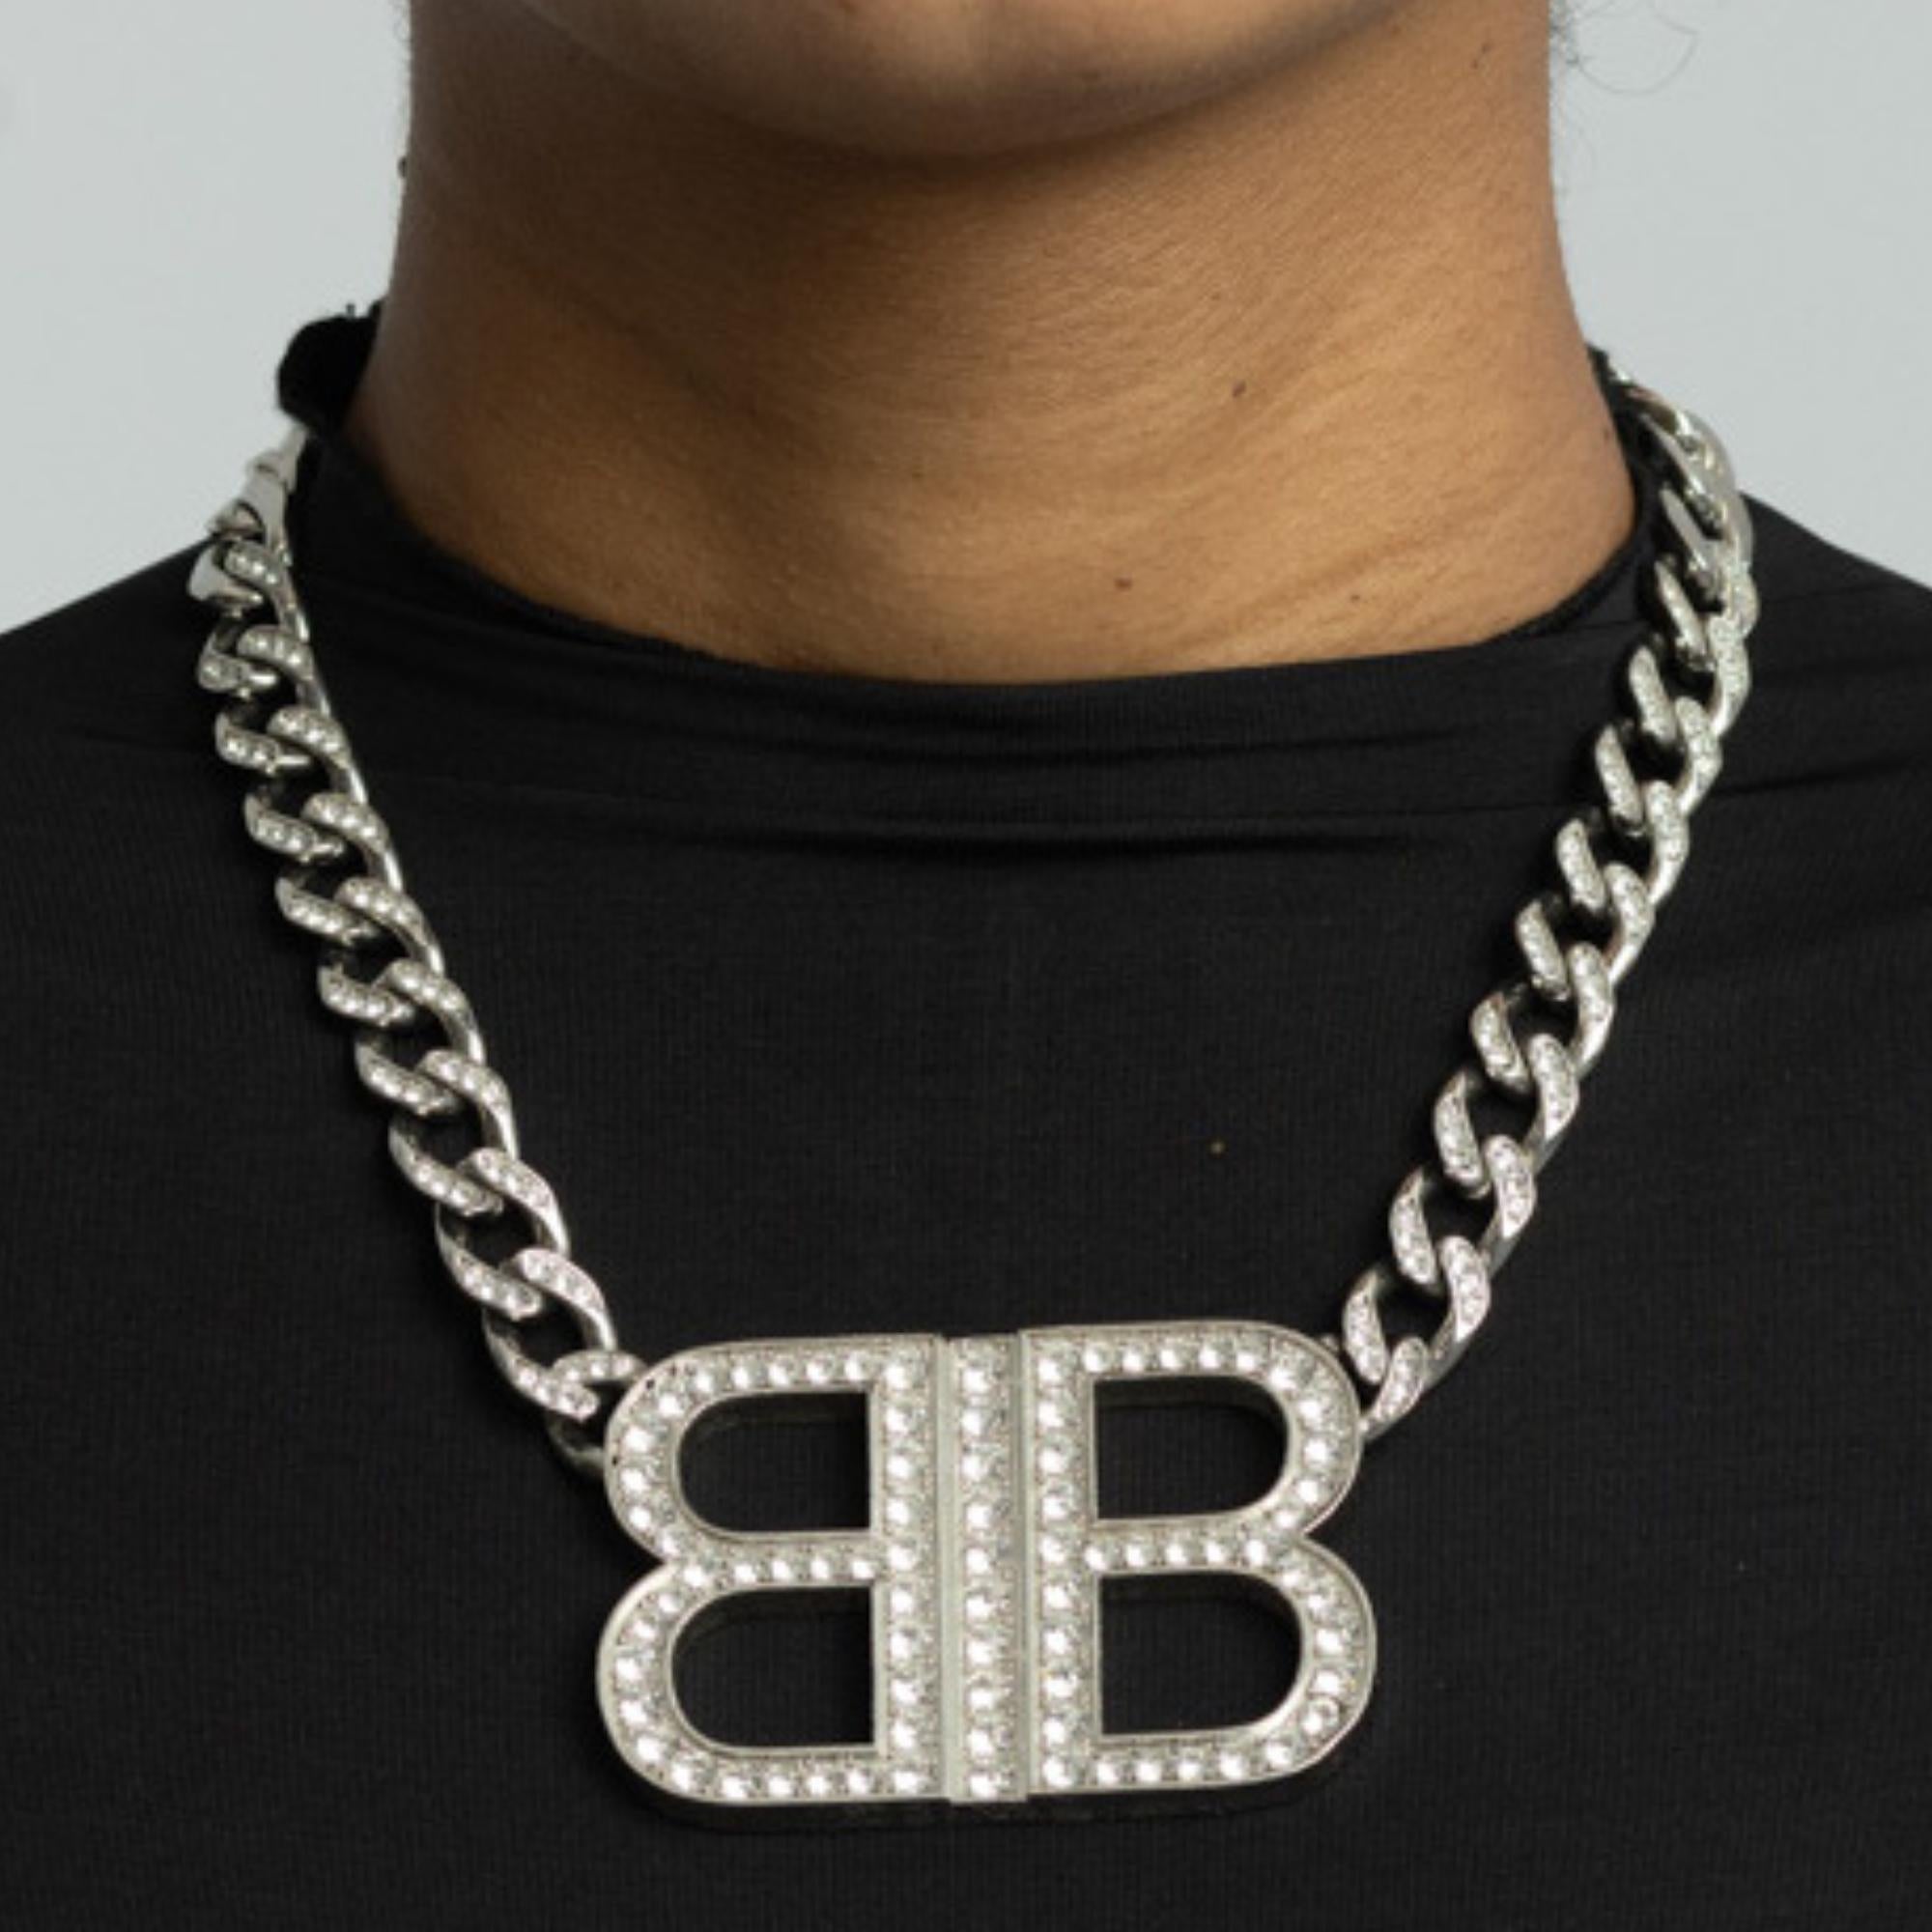 Curb chain choker-style necklace in silver-tone brass. Crystal-cut detailing throughout.

Textured logo hardware at length.
Adjustable and detachable lobster-clasp fastening.
Length is 18 in

Color: Silver/Crystal
Brass, glass.
Made in Italy